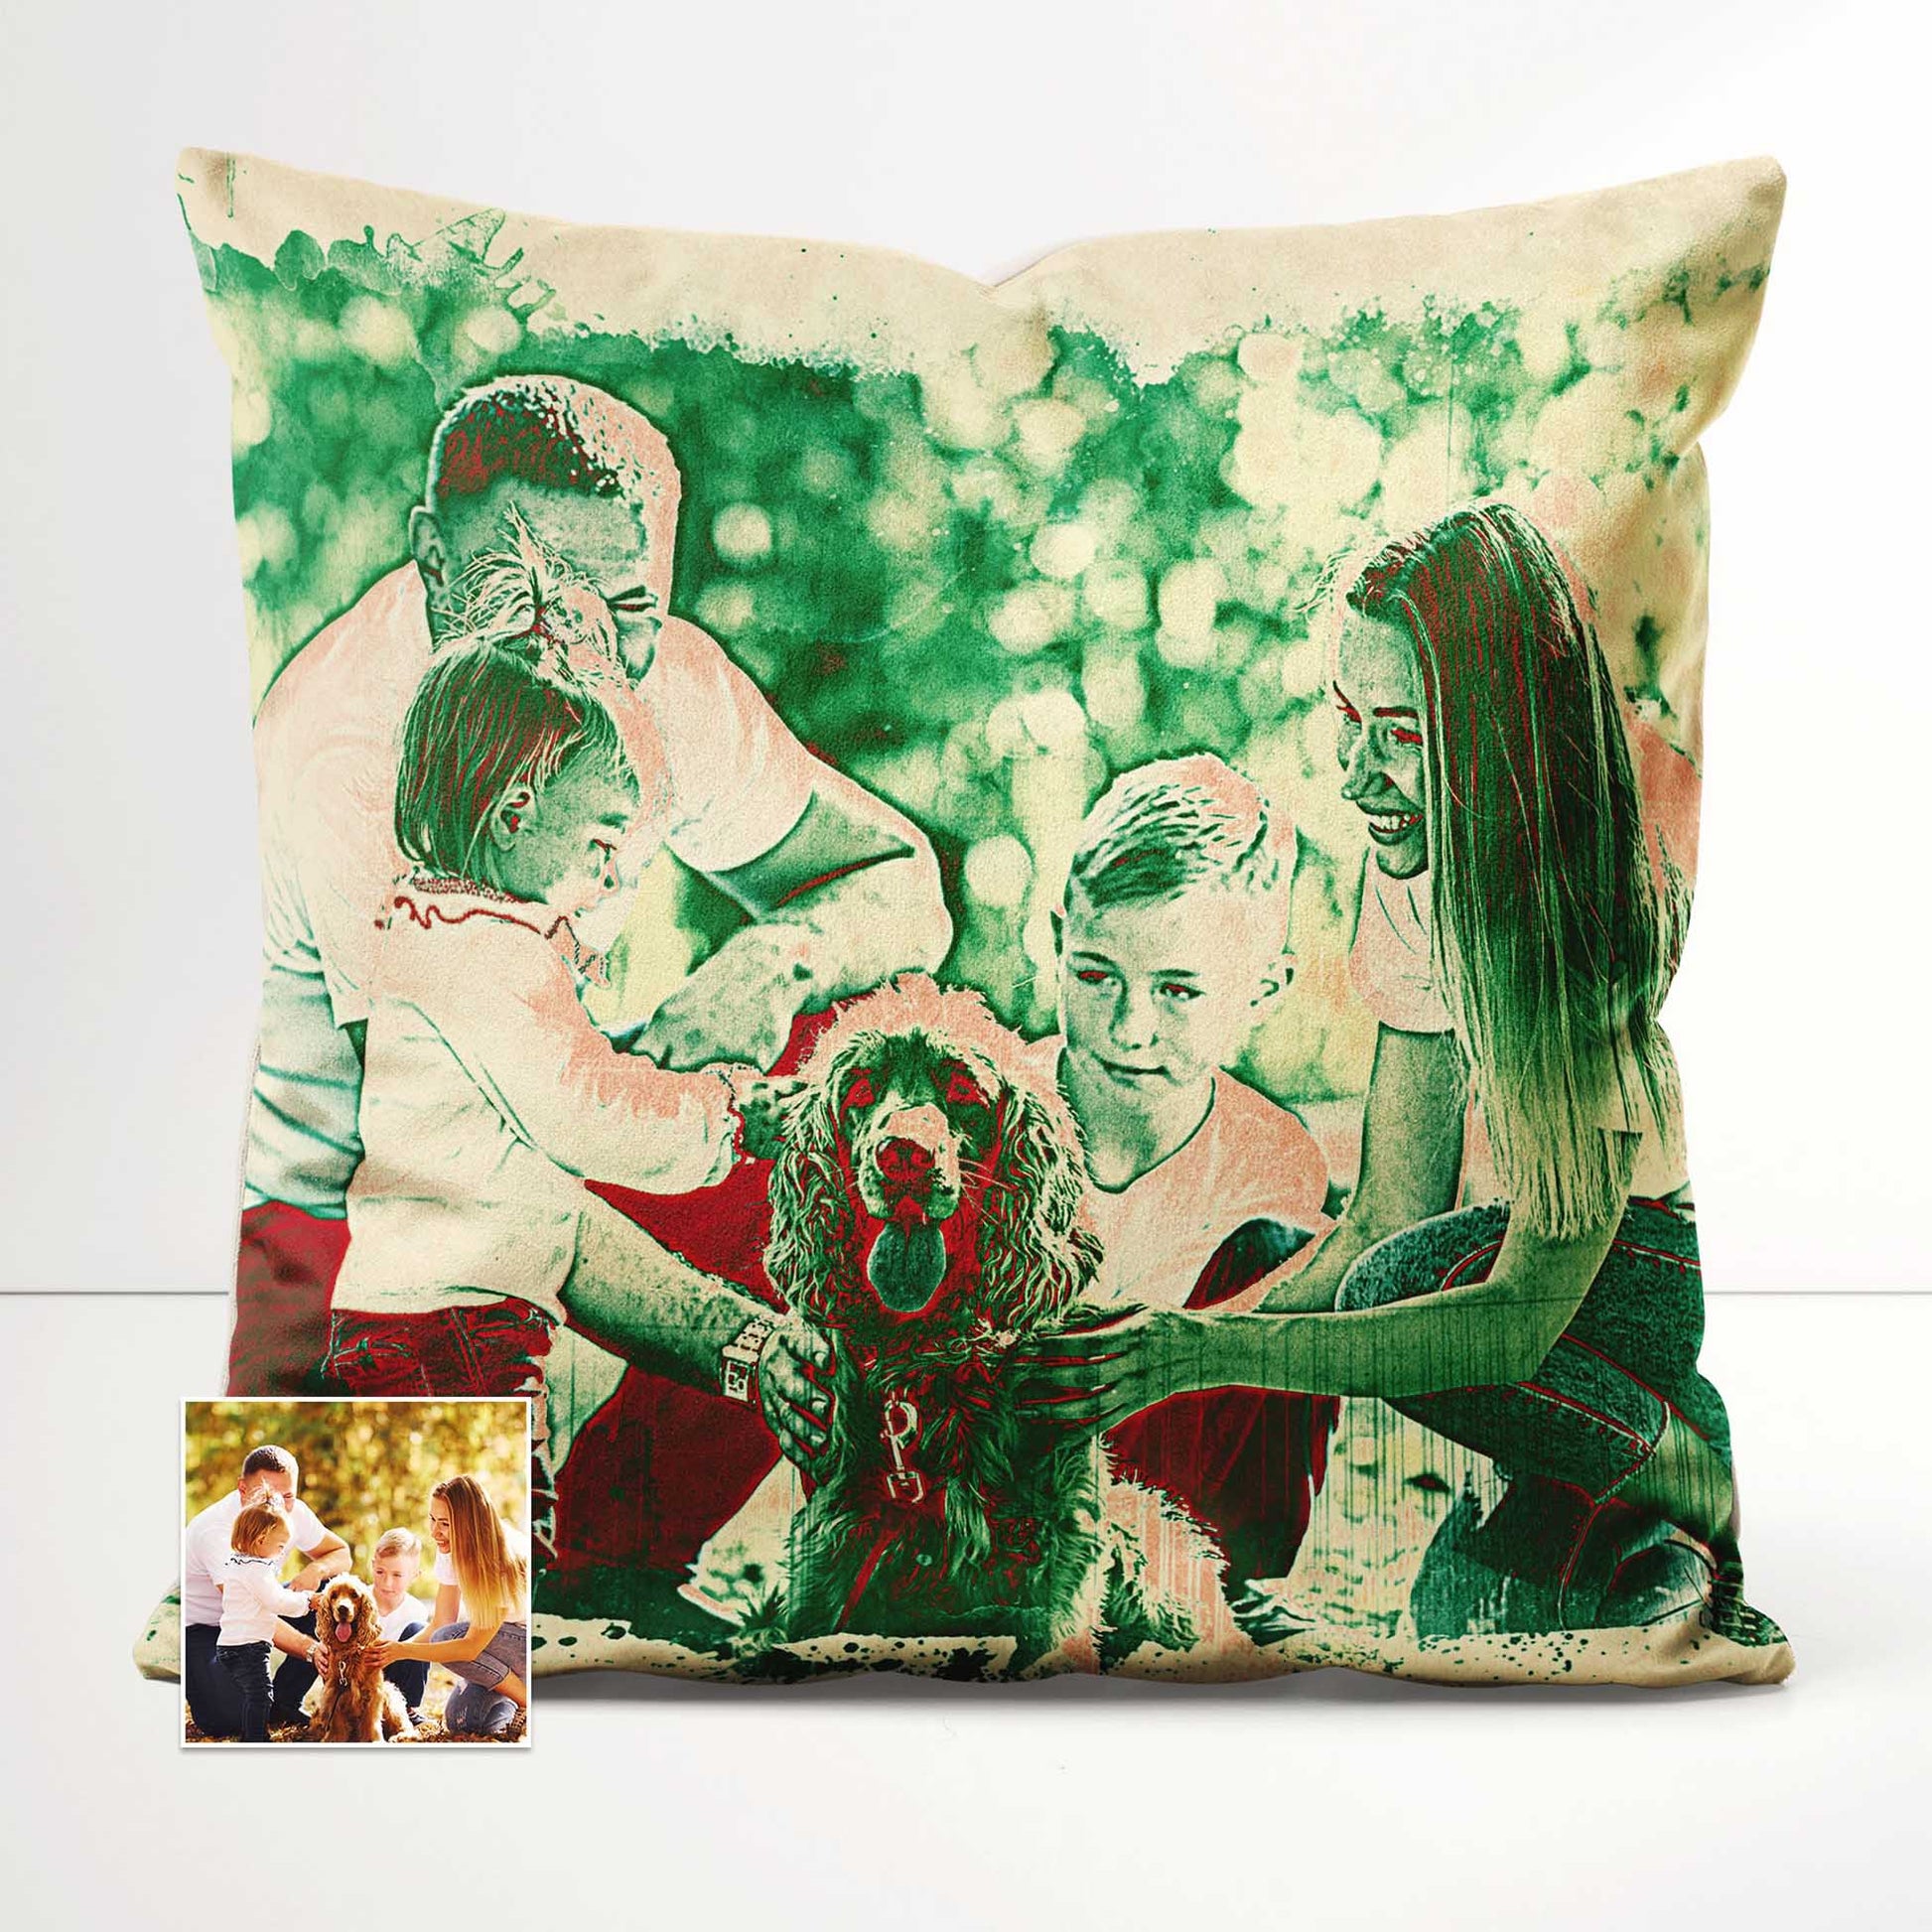 Brighten up your home with the Personalised Green & Red Cushion. Its vivid and vibrant colors create a sharp and lively display, while the velvet fabric adds a touch of luxury. Handmade with precision, bespoke cushion 